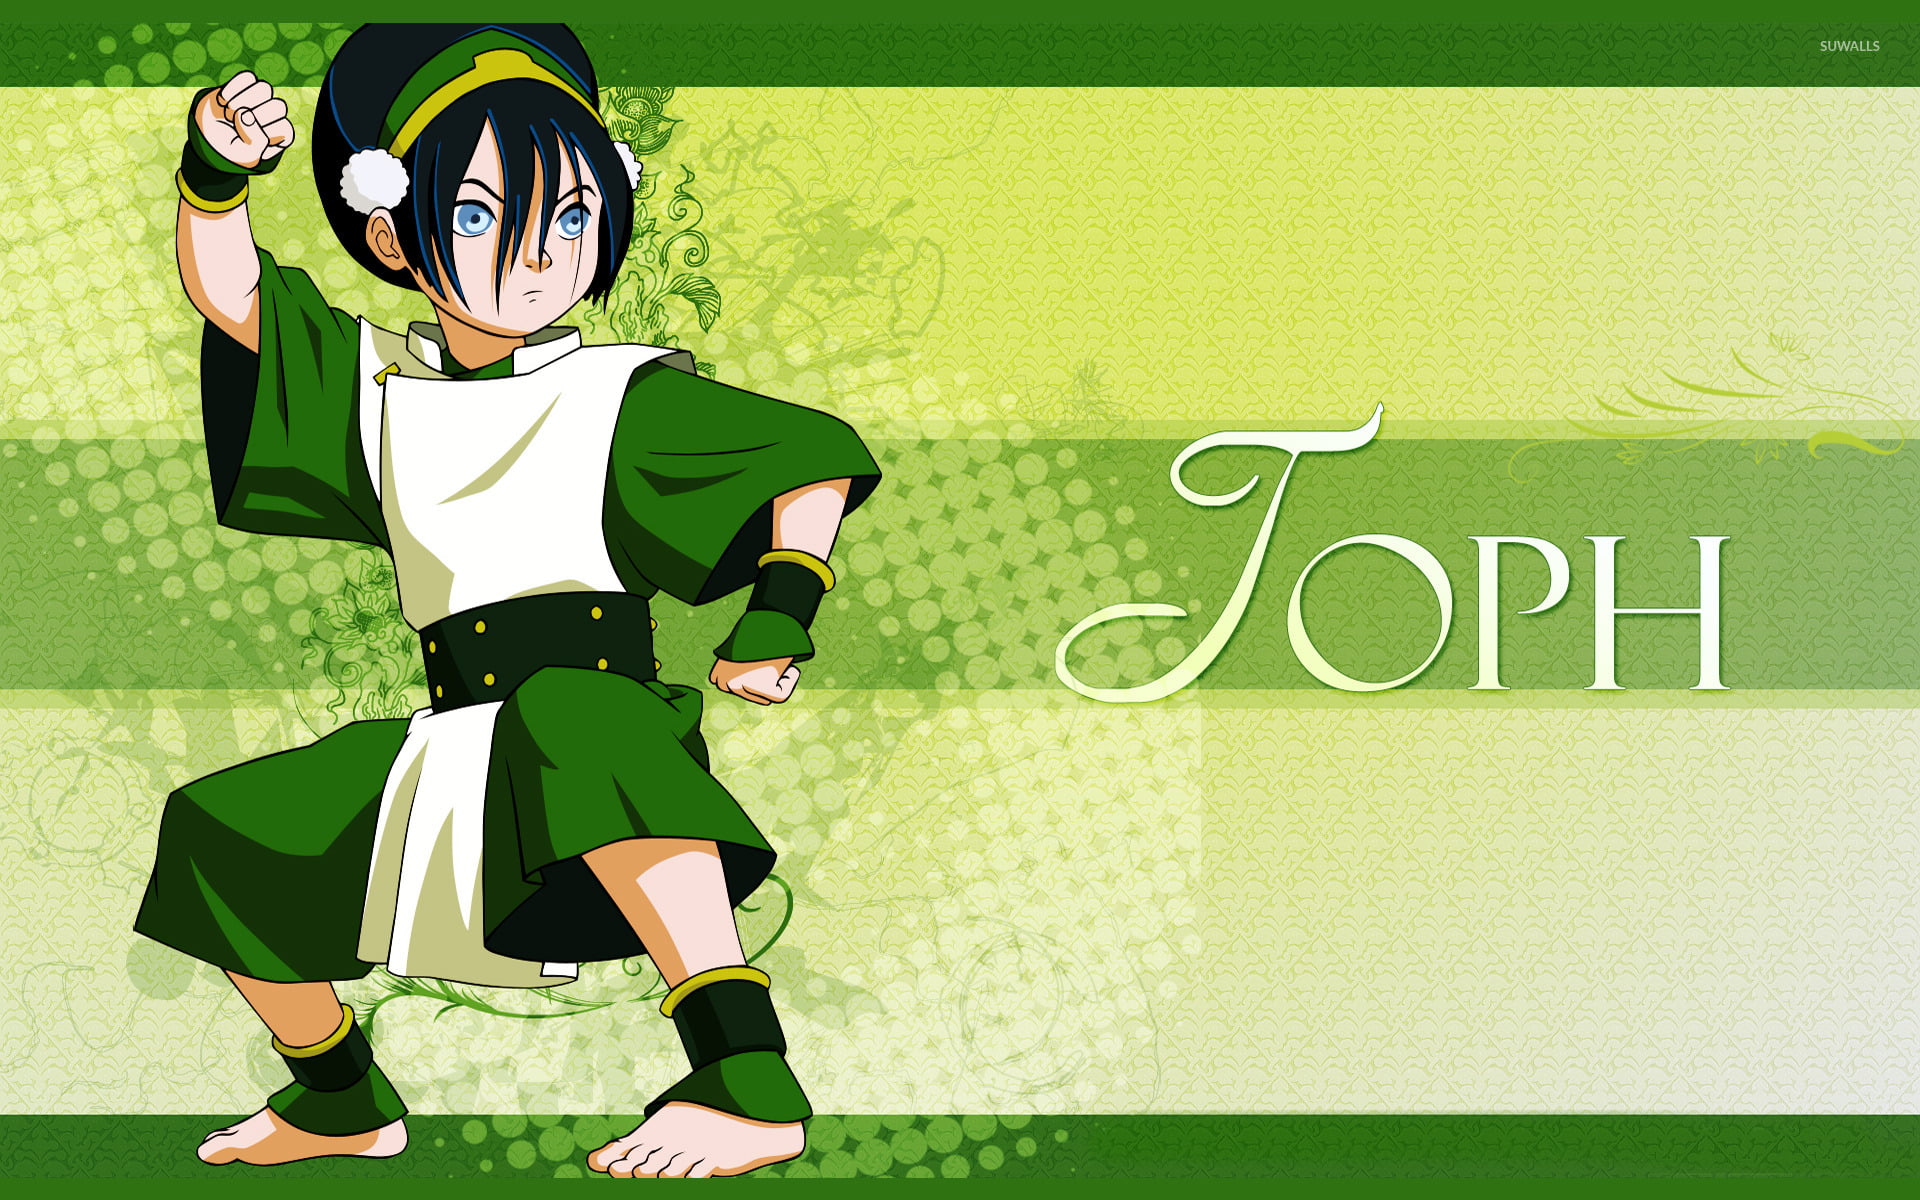 Avatar The Last Airbender’s Toph Beifong